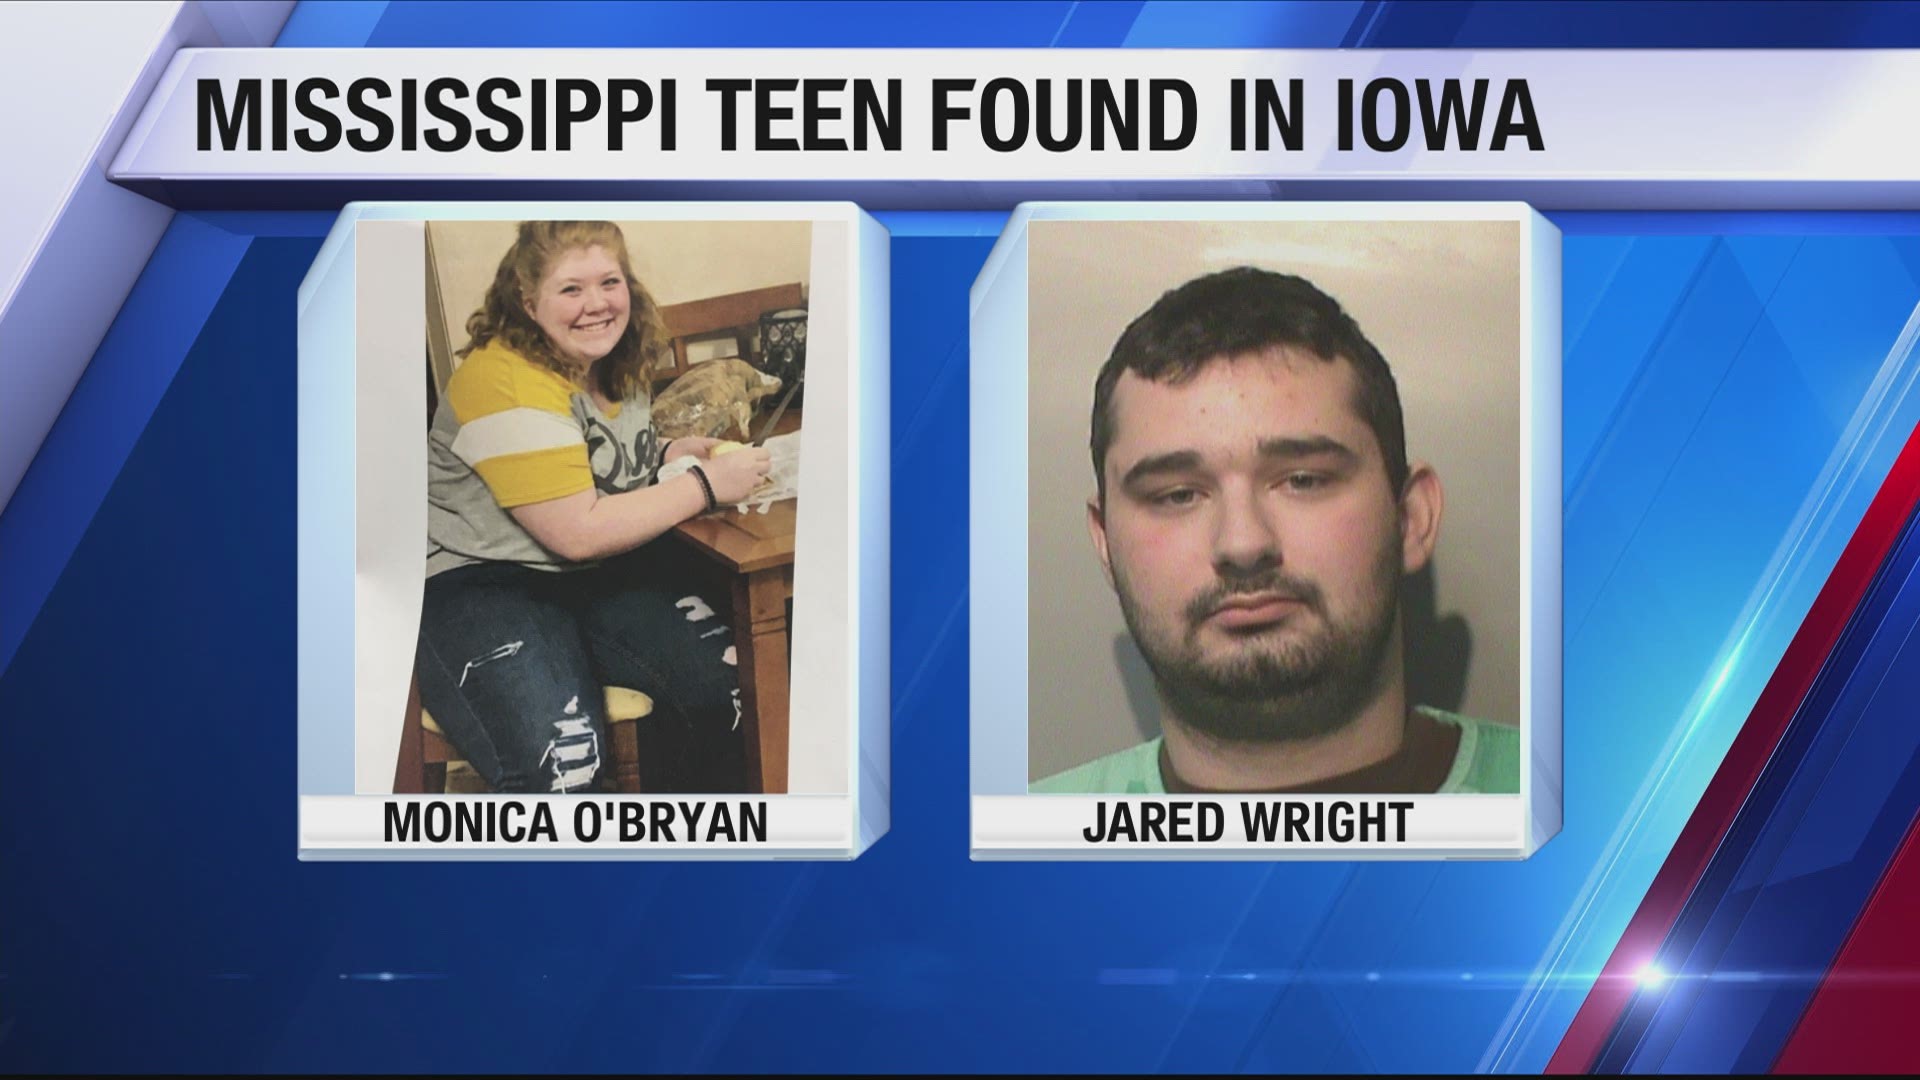 Police said Snapchat helped officers locate missing 15-year-old Monica O'Bryan Sunday. O'Bryan had been missing since Feb. 24.